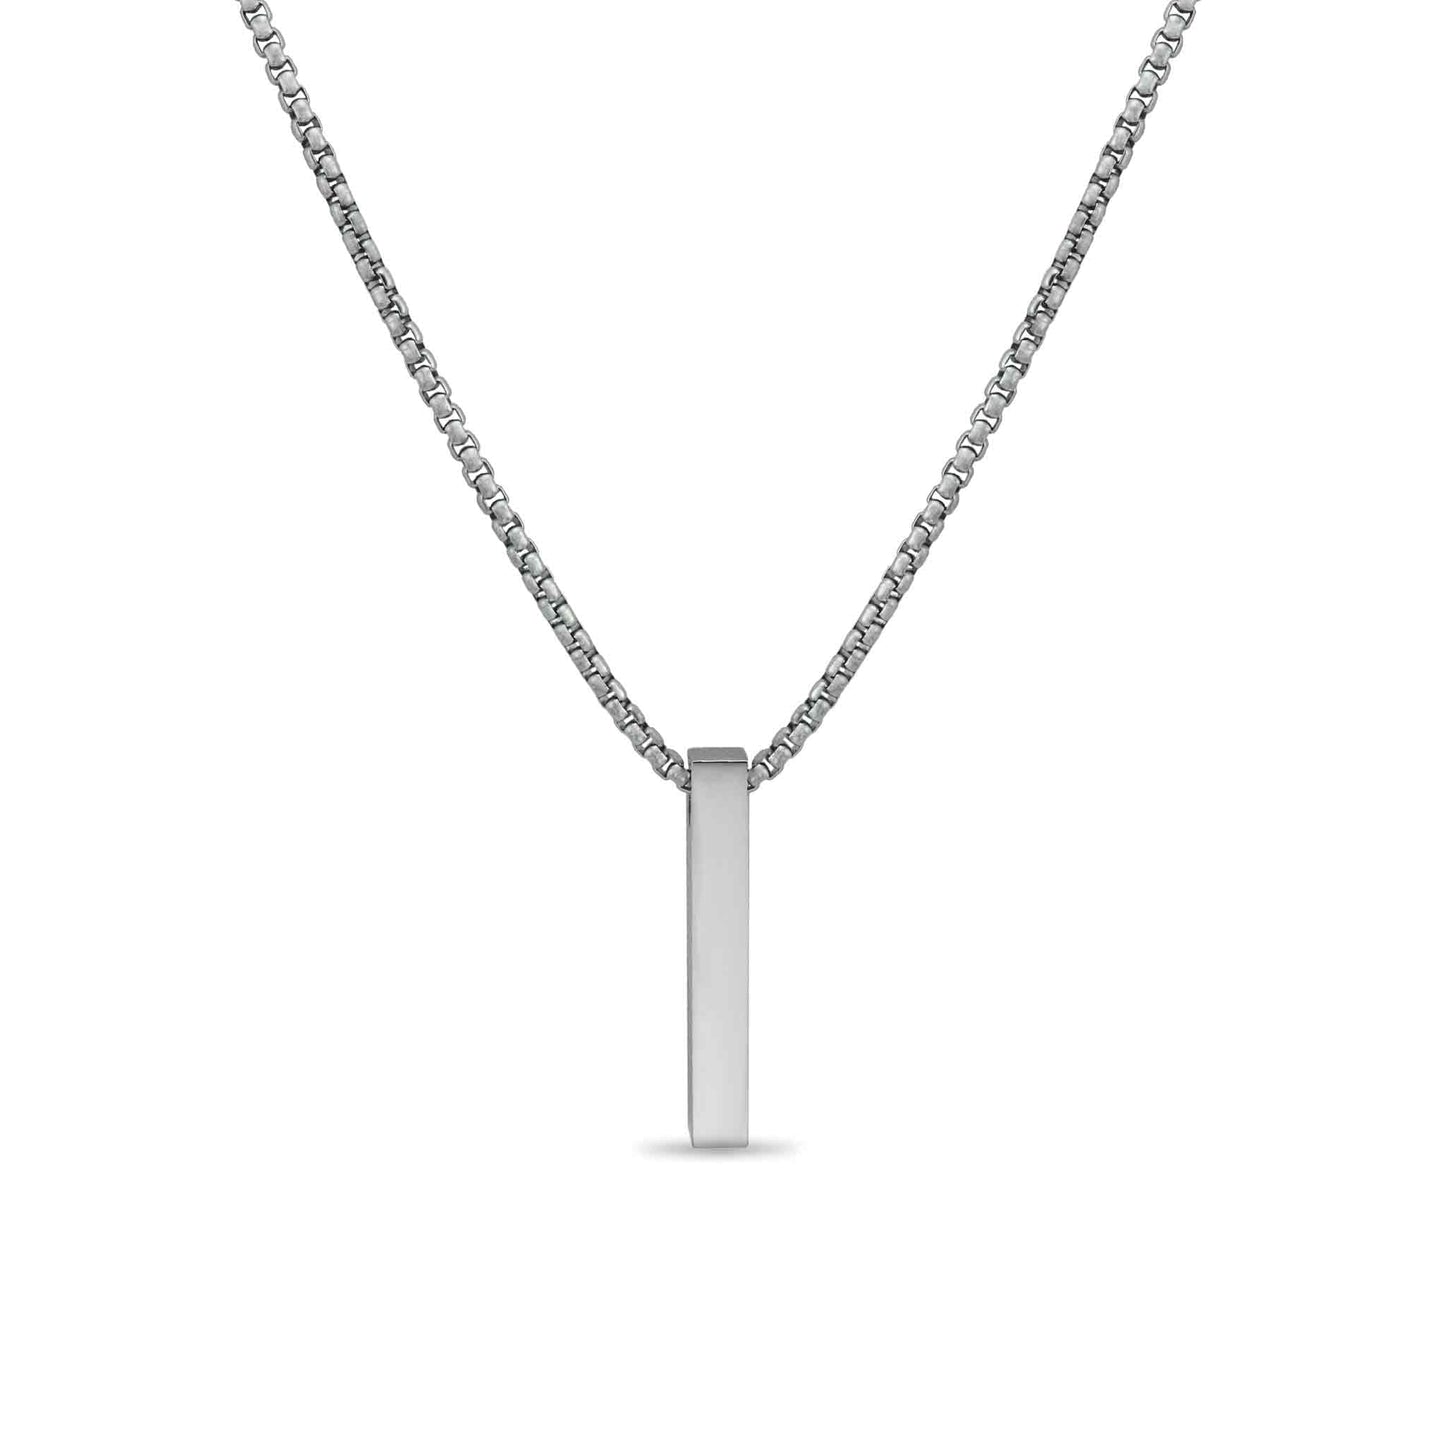 4 Sided Vertical Bar Necklace w/ 24 Box Chain / SBB0294